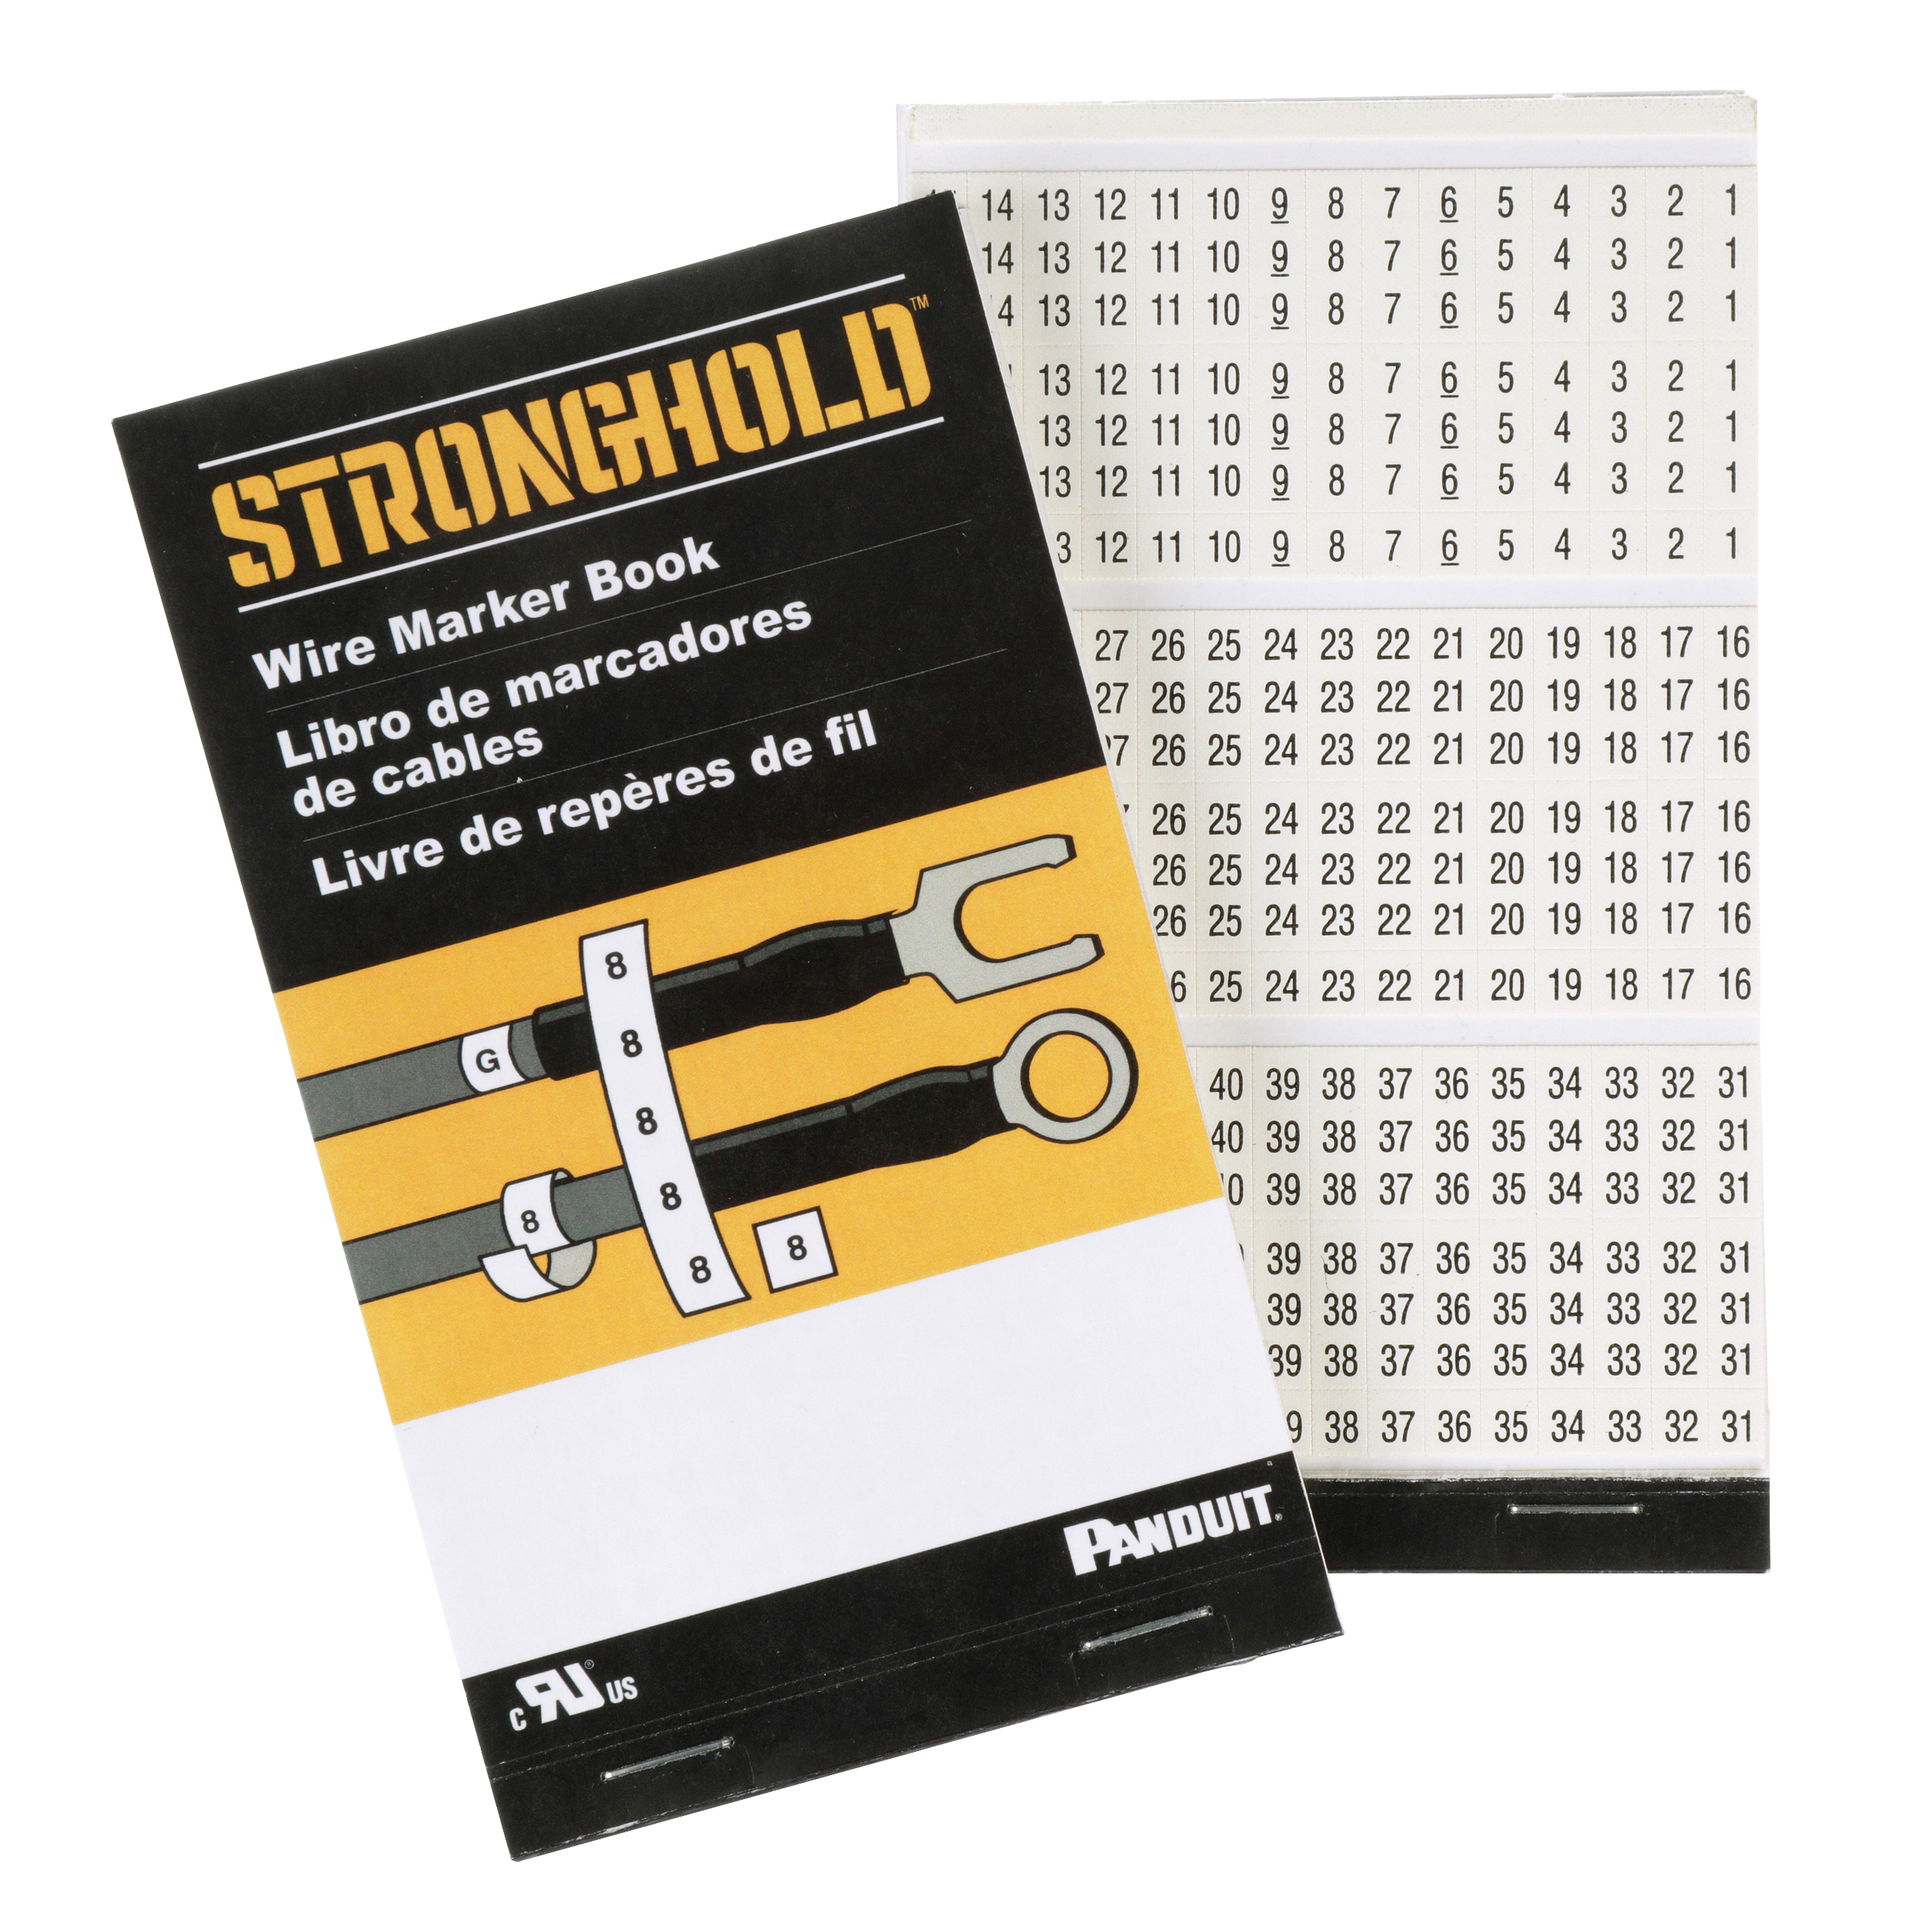 StrongHold™ PCMB-16 Pre-Printed Wire Marker Book, 16, Vinyl Cloth, White, Black